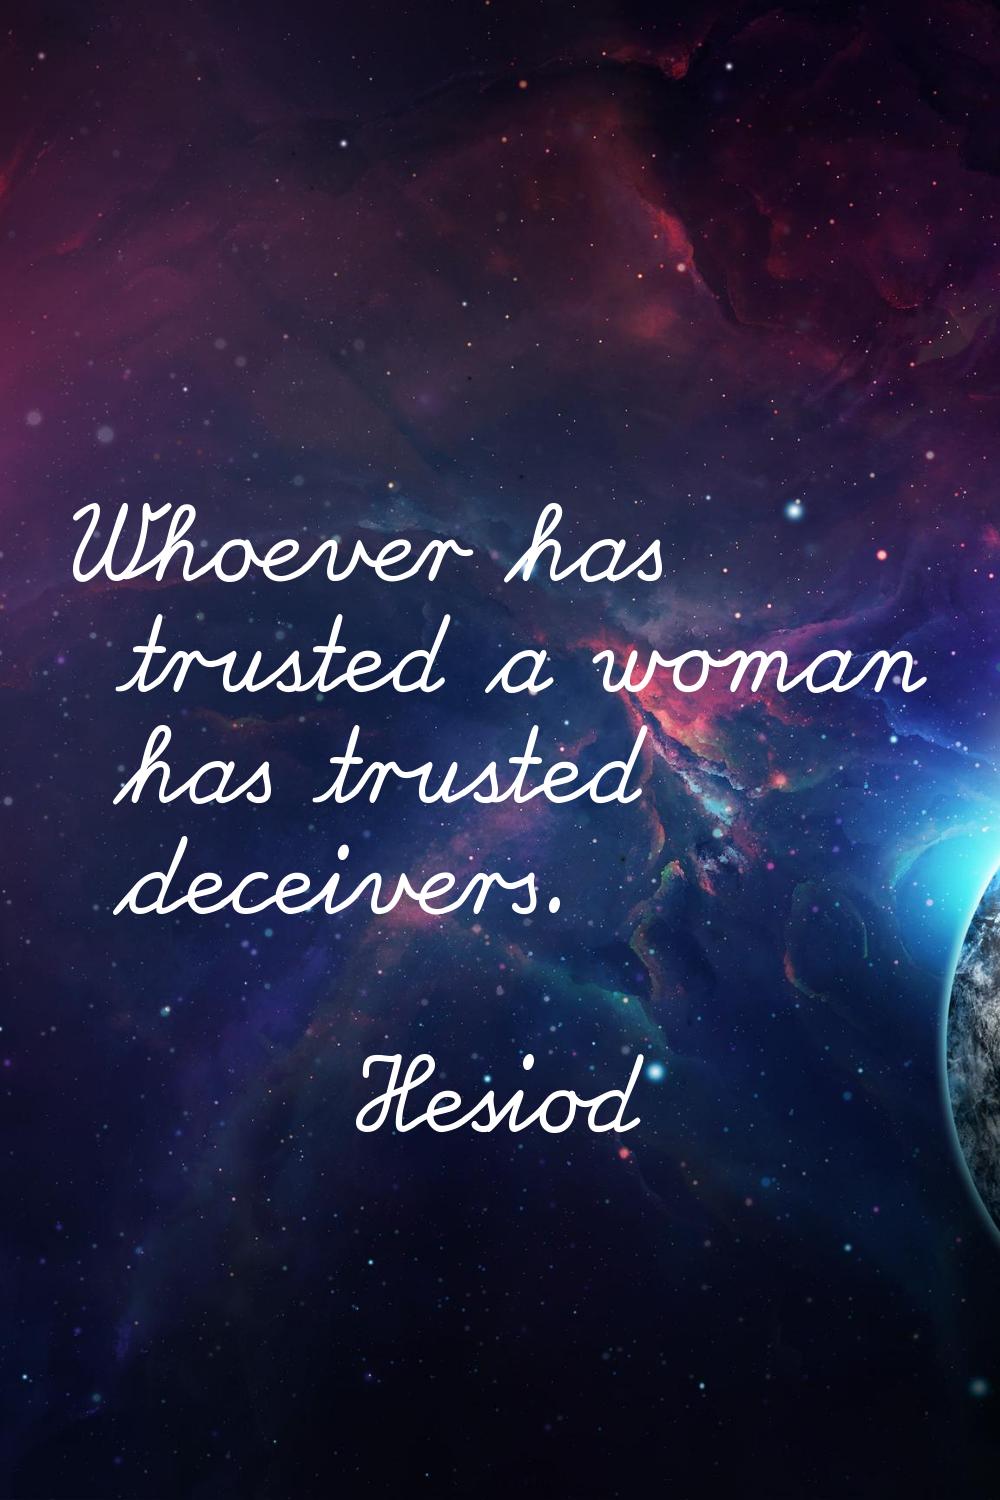 Whoever has trusted a woman has trusted deceivers.